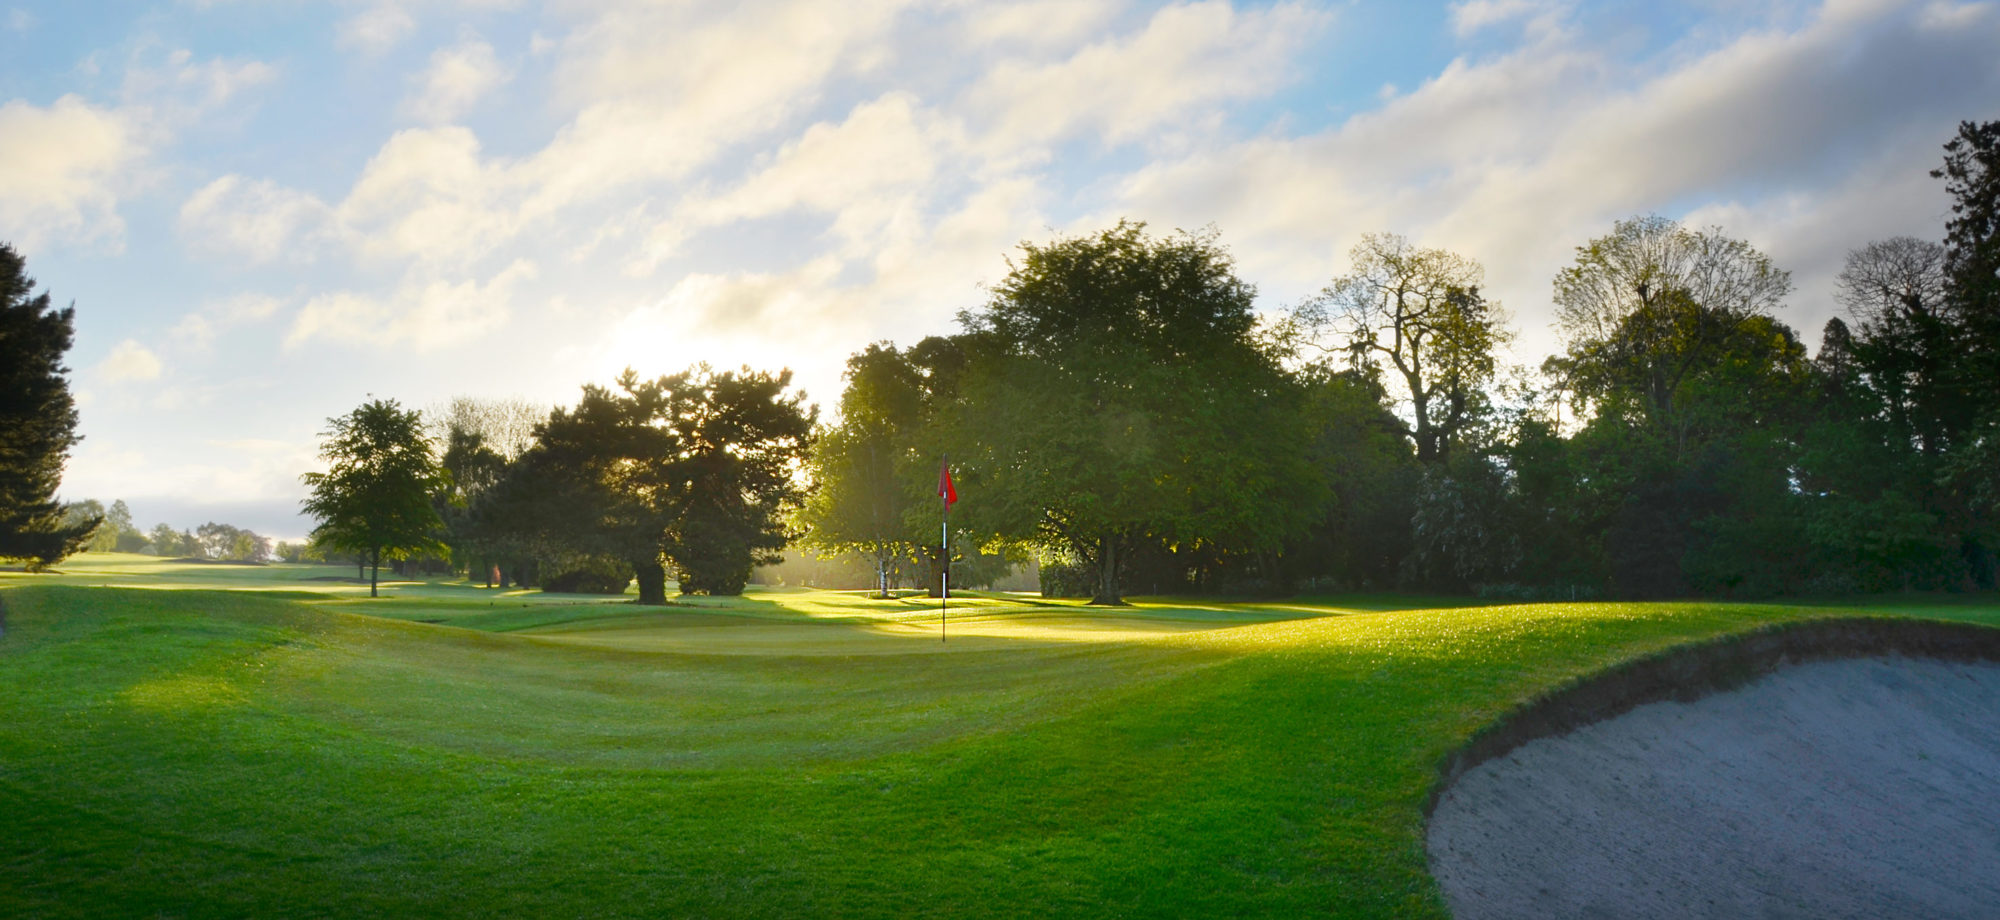 A beautiful golf course dawn photograph at Exeter Golf and Country Club